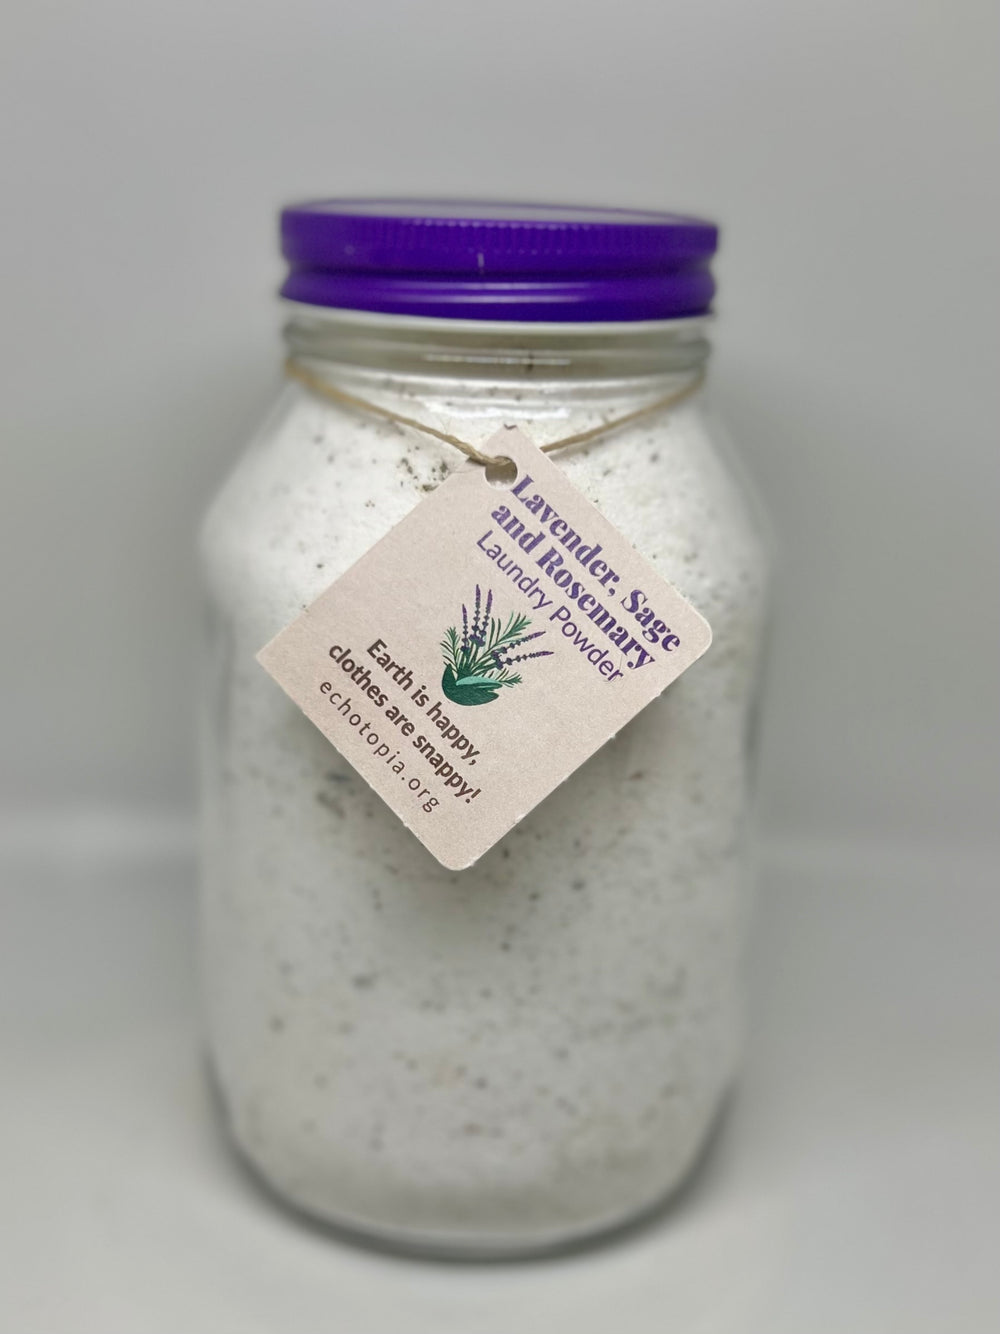 Lavender, Sage and Rosemary Laundry Powder. Made by Echotopia in Baltimore. Free of dangerous chemicals, optical brighteners, phosphates or fragrances.